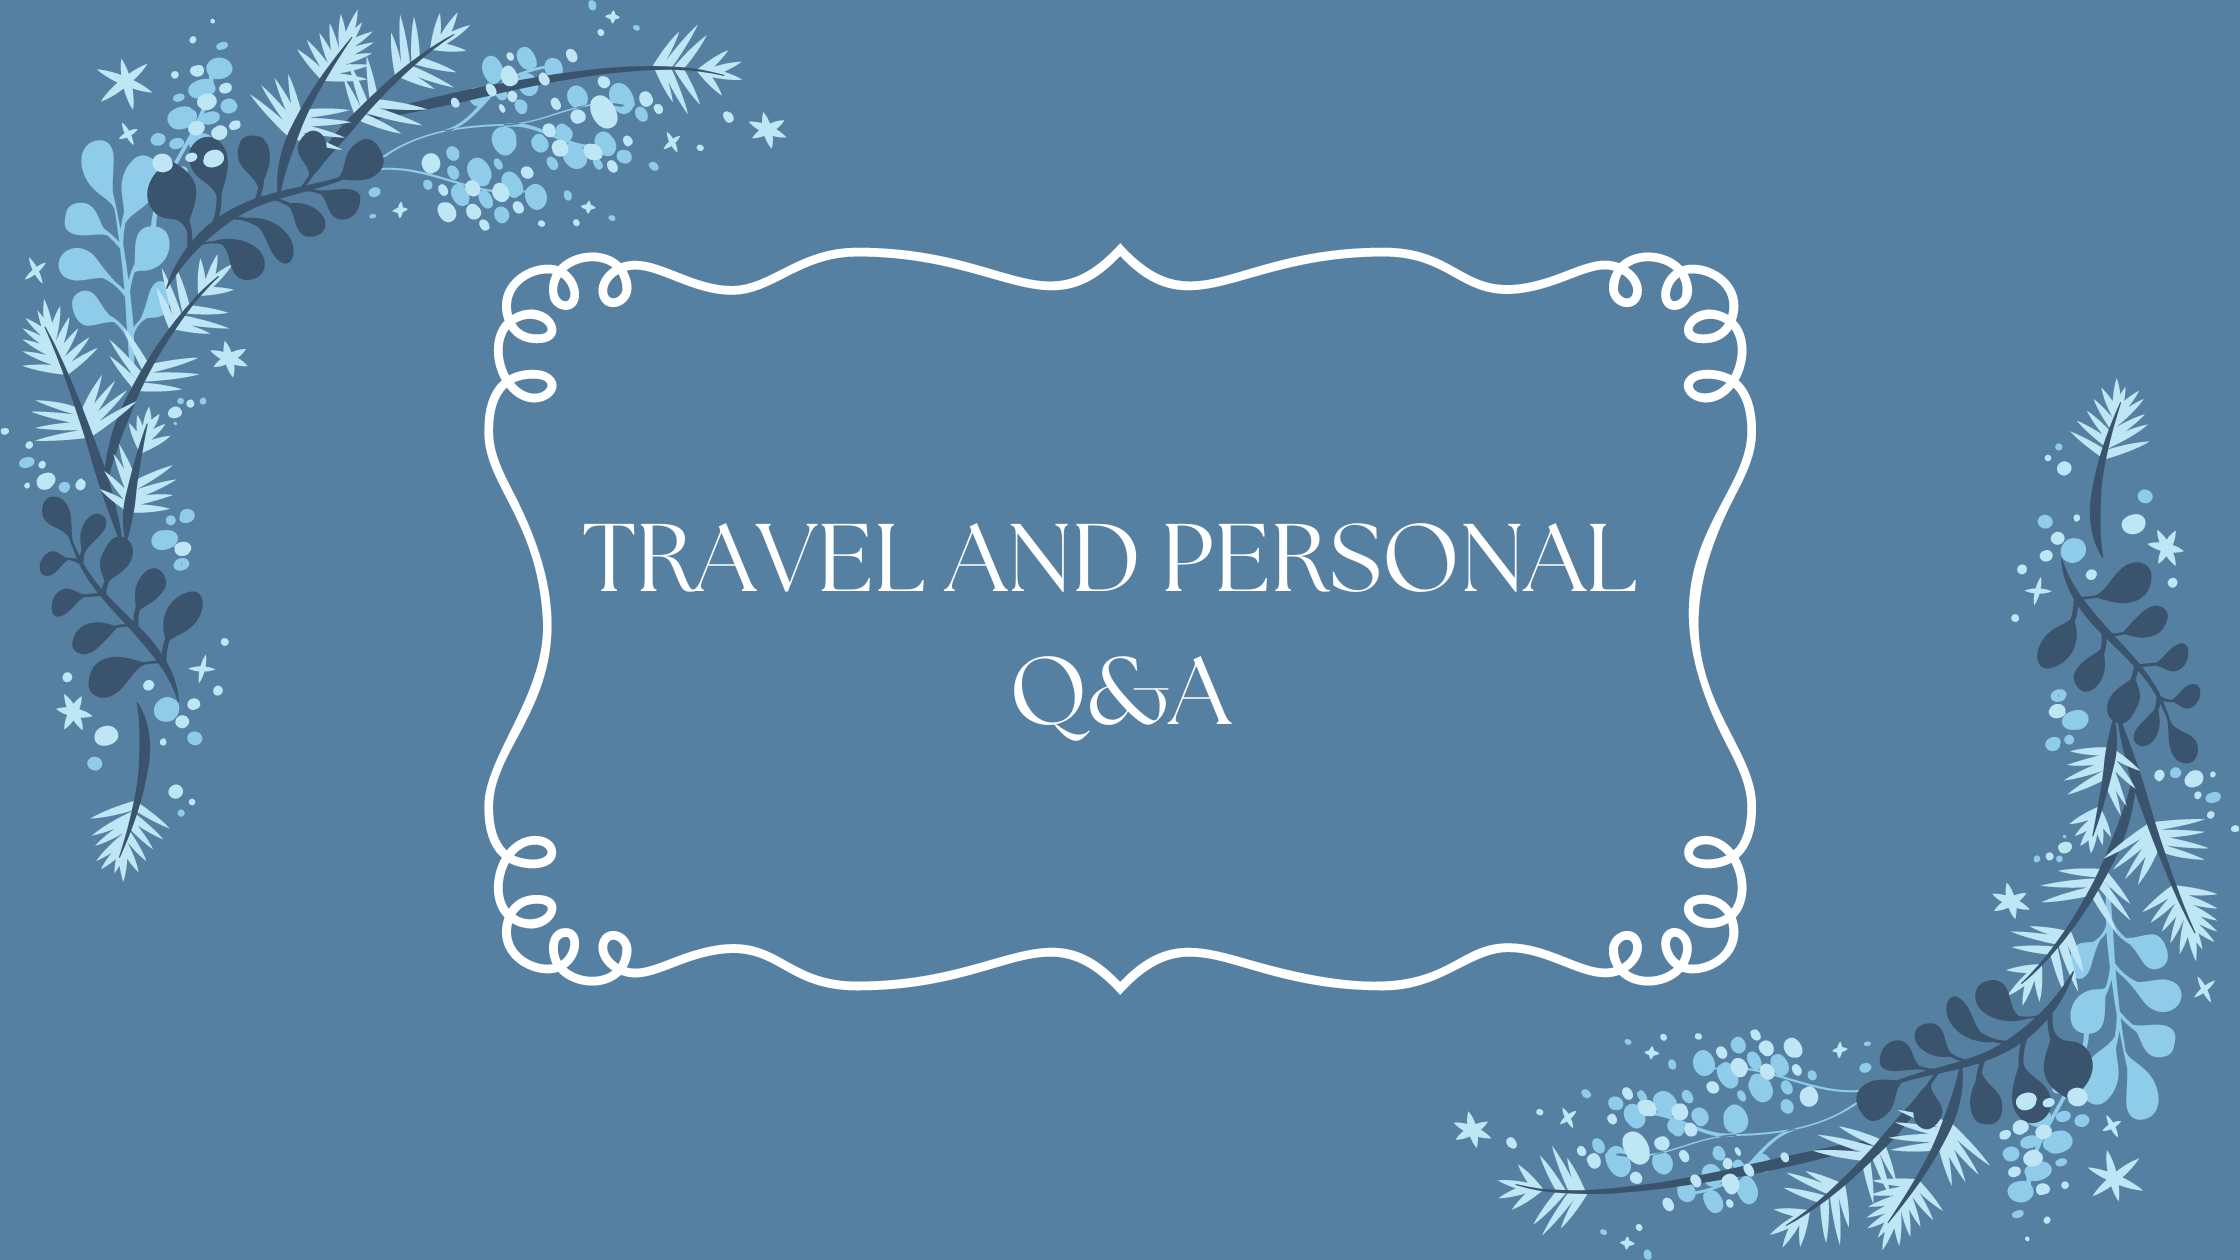 All of Your Travel & Personal Questions Answered